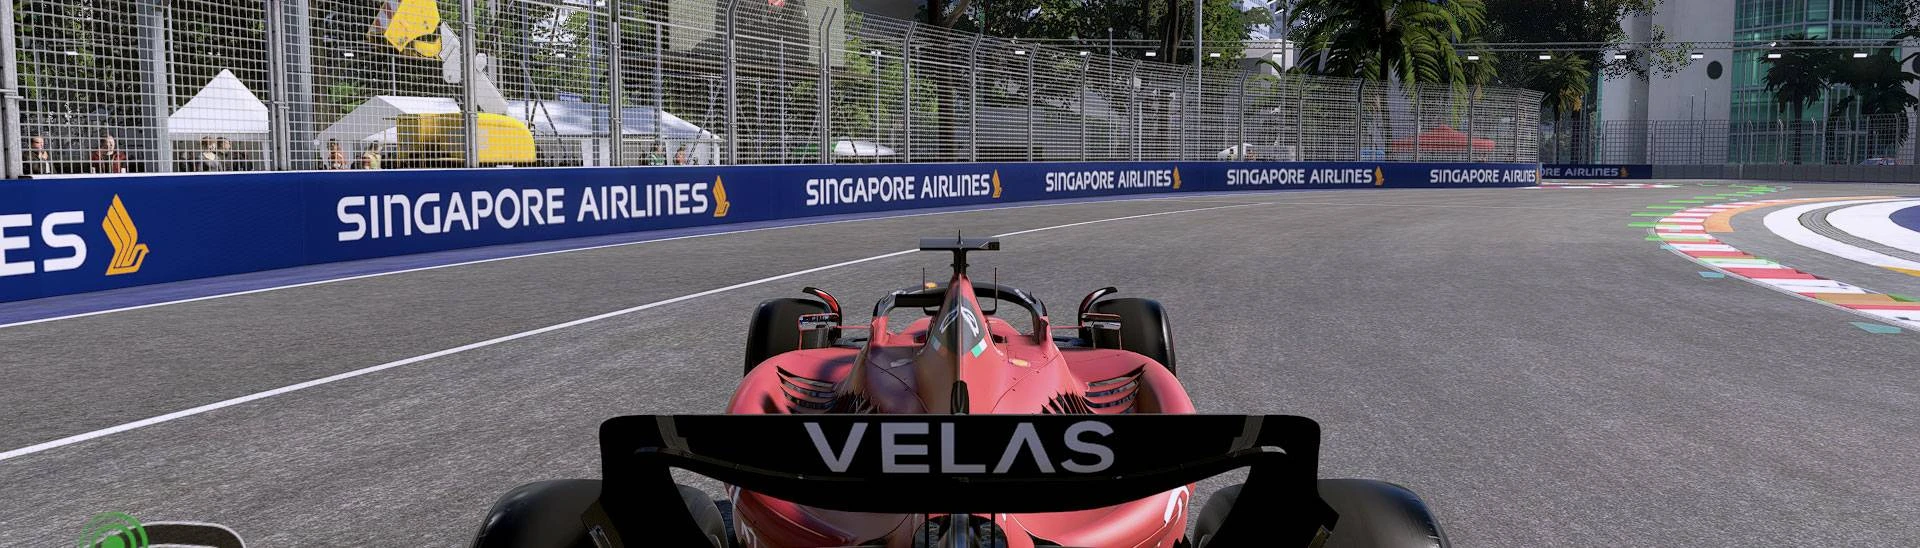 F1 22 VR GAMEPLAY - This is Amazing 